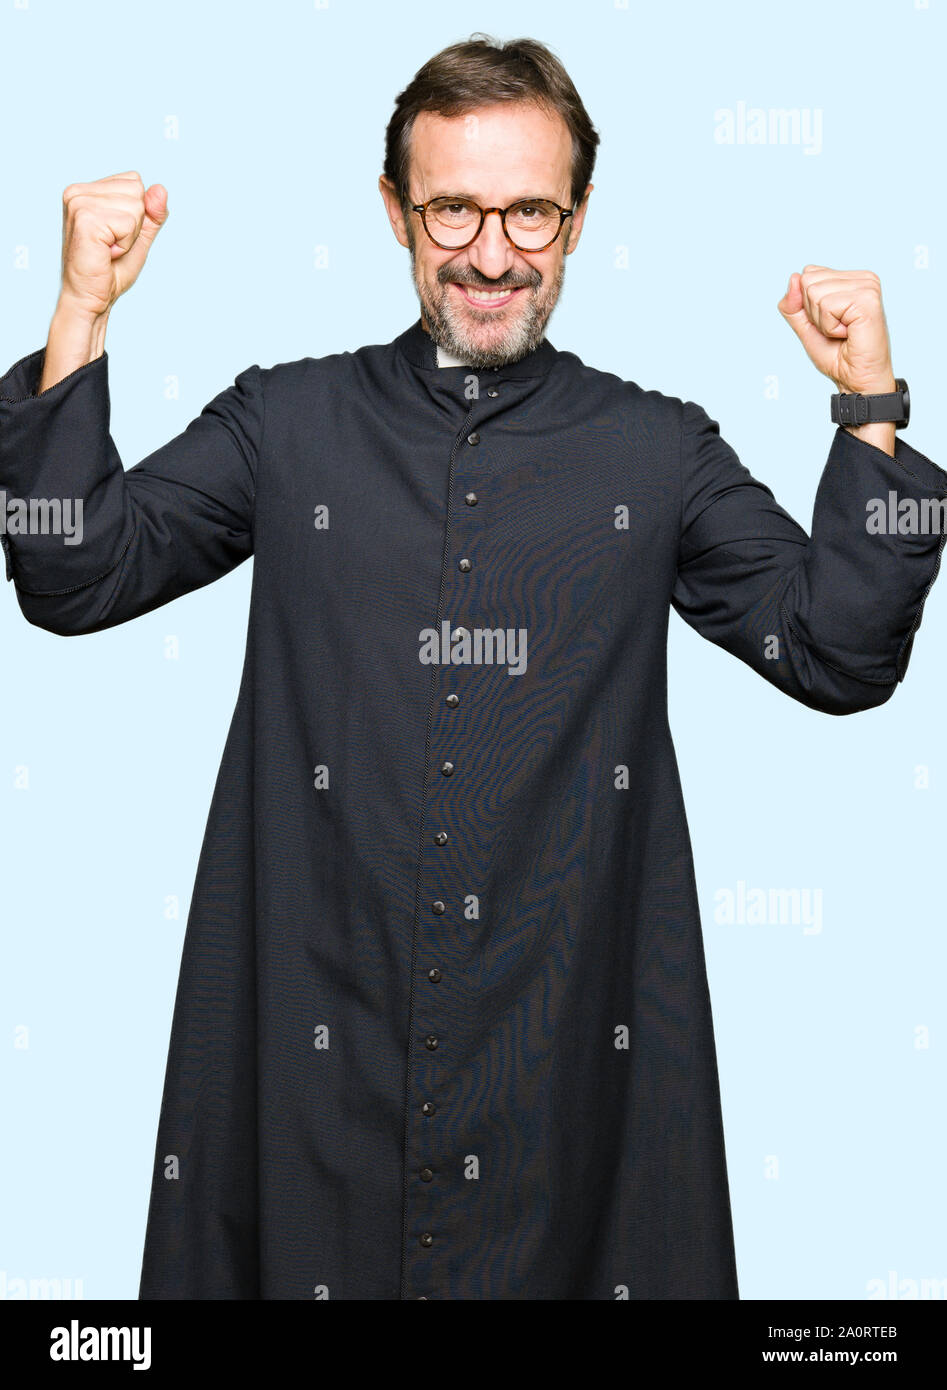 Middle age priest man wearing catholic robe showing arms muscles smiling proud. Fitness concept. Stock Photo